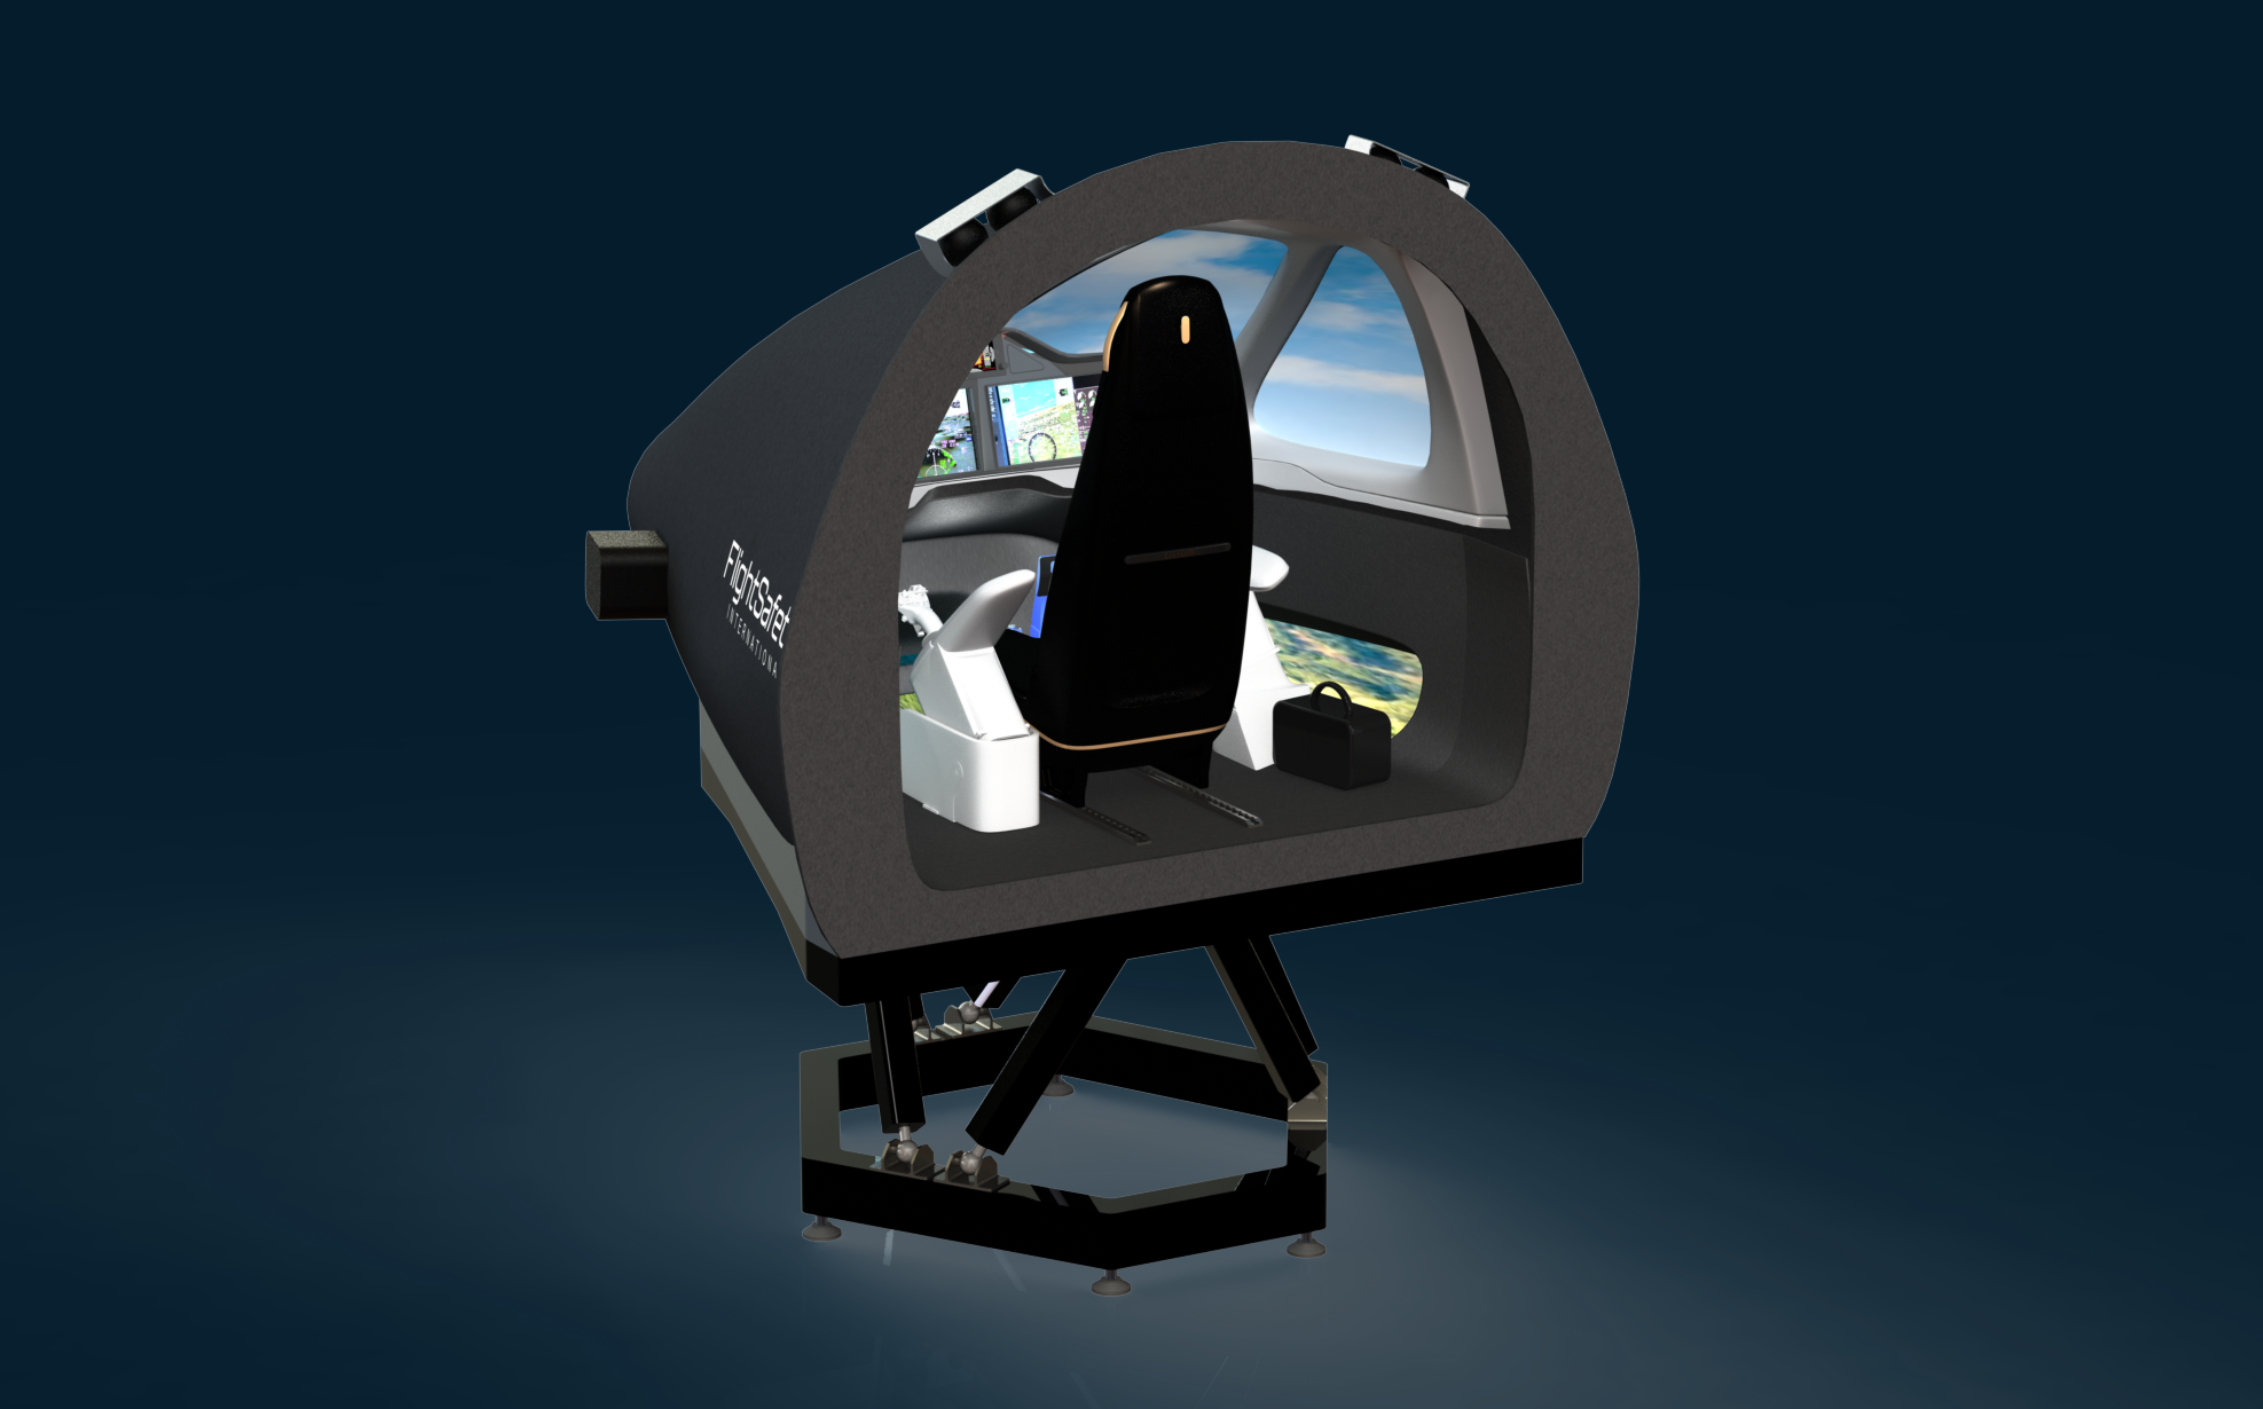 State-of-the-art flight simulator representing the Lilium Jet to support type-certification